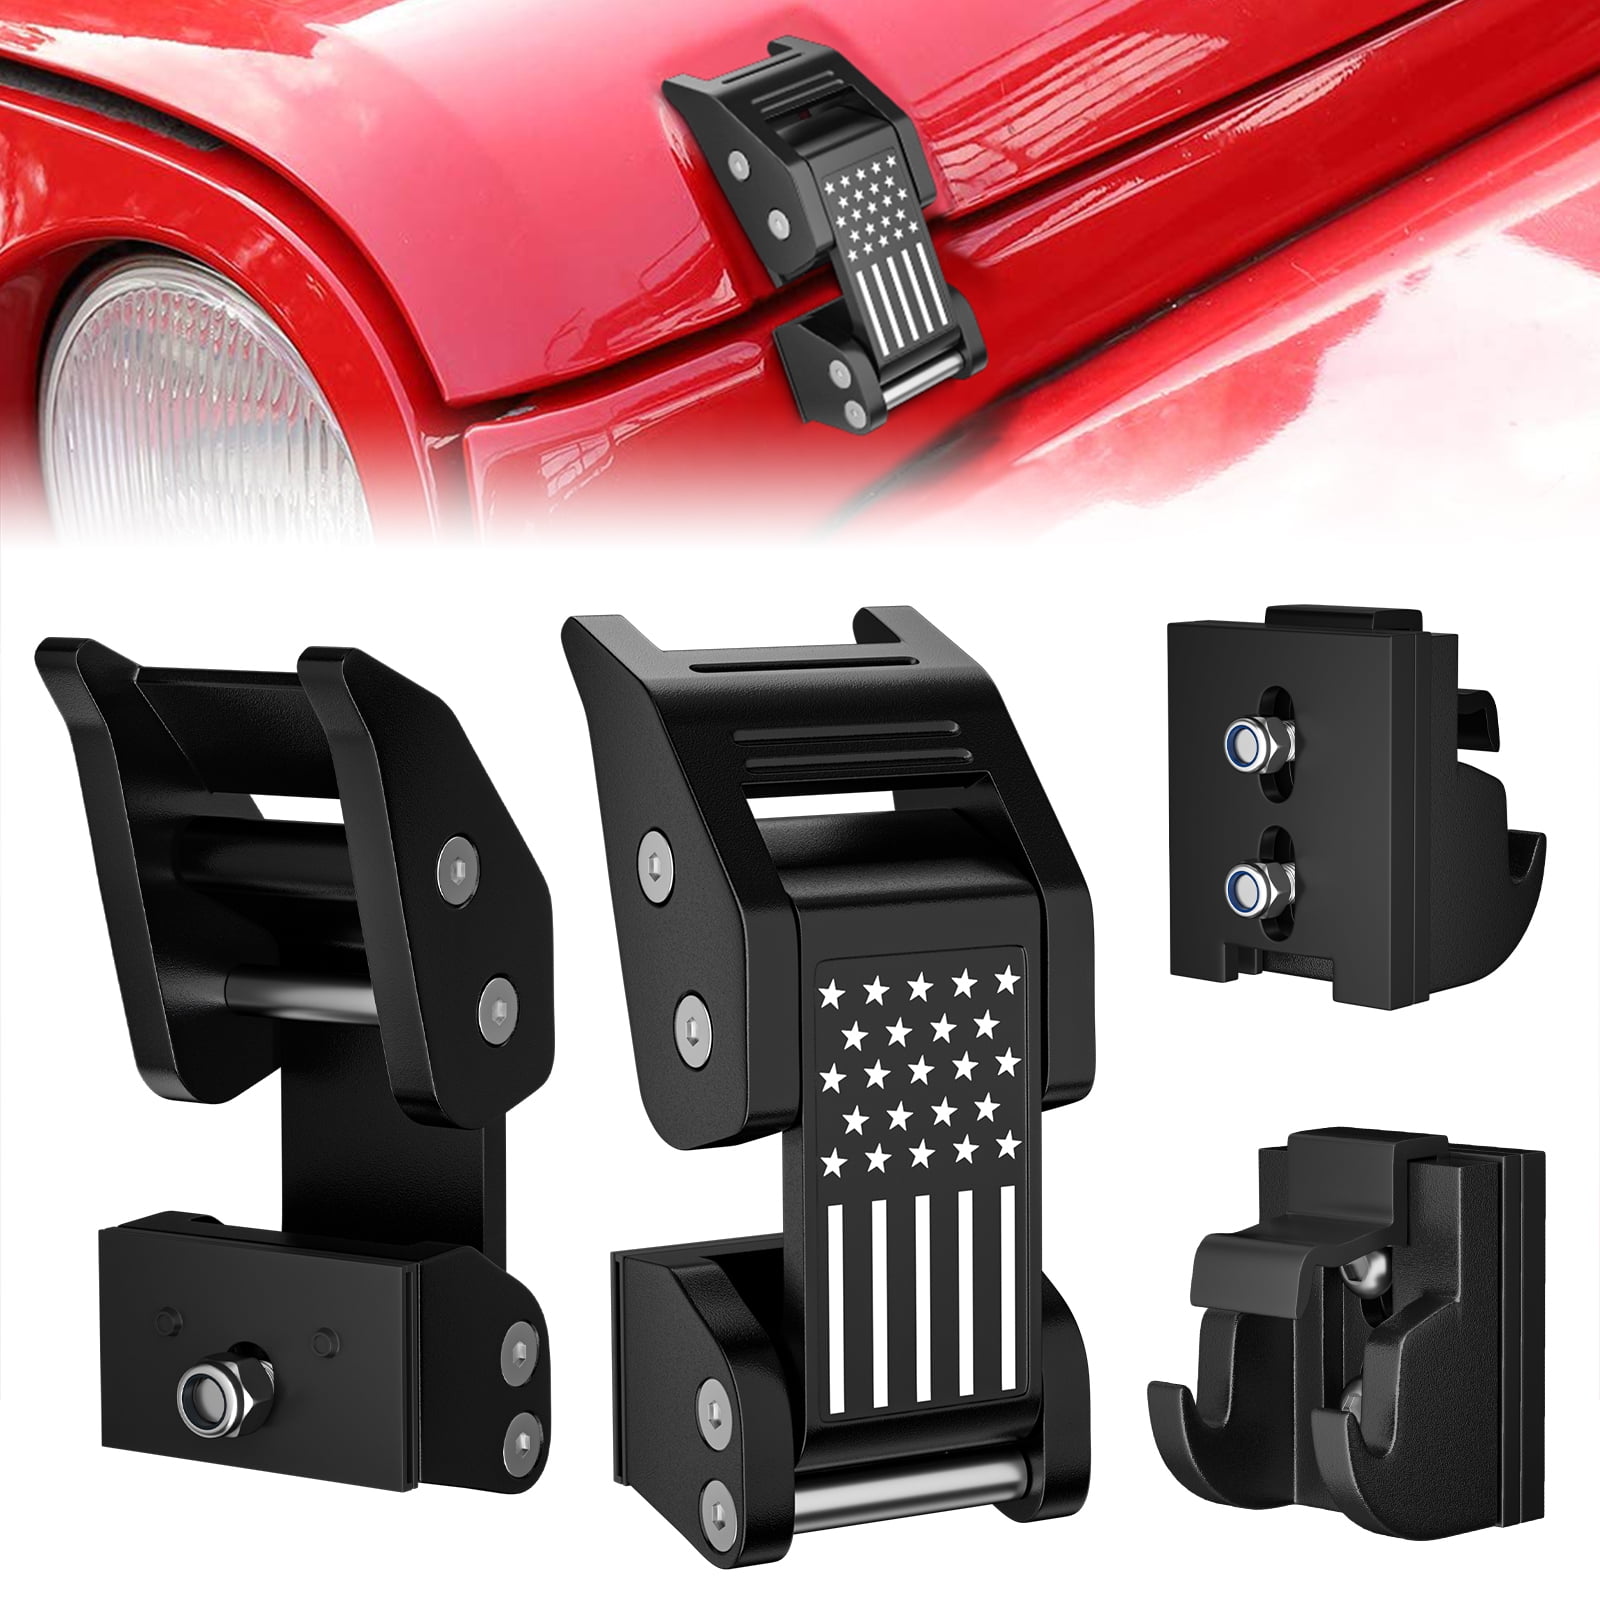 Hood Latches,Adjustable Hood Latch Locking Catch Kits, Aluminum Latch with  . Flag Style Compatible Jeep Wrangler | Walmart Canada